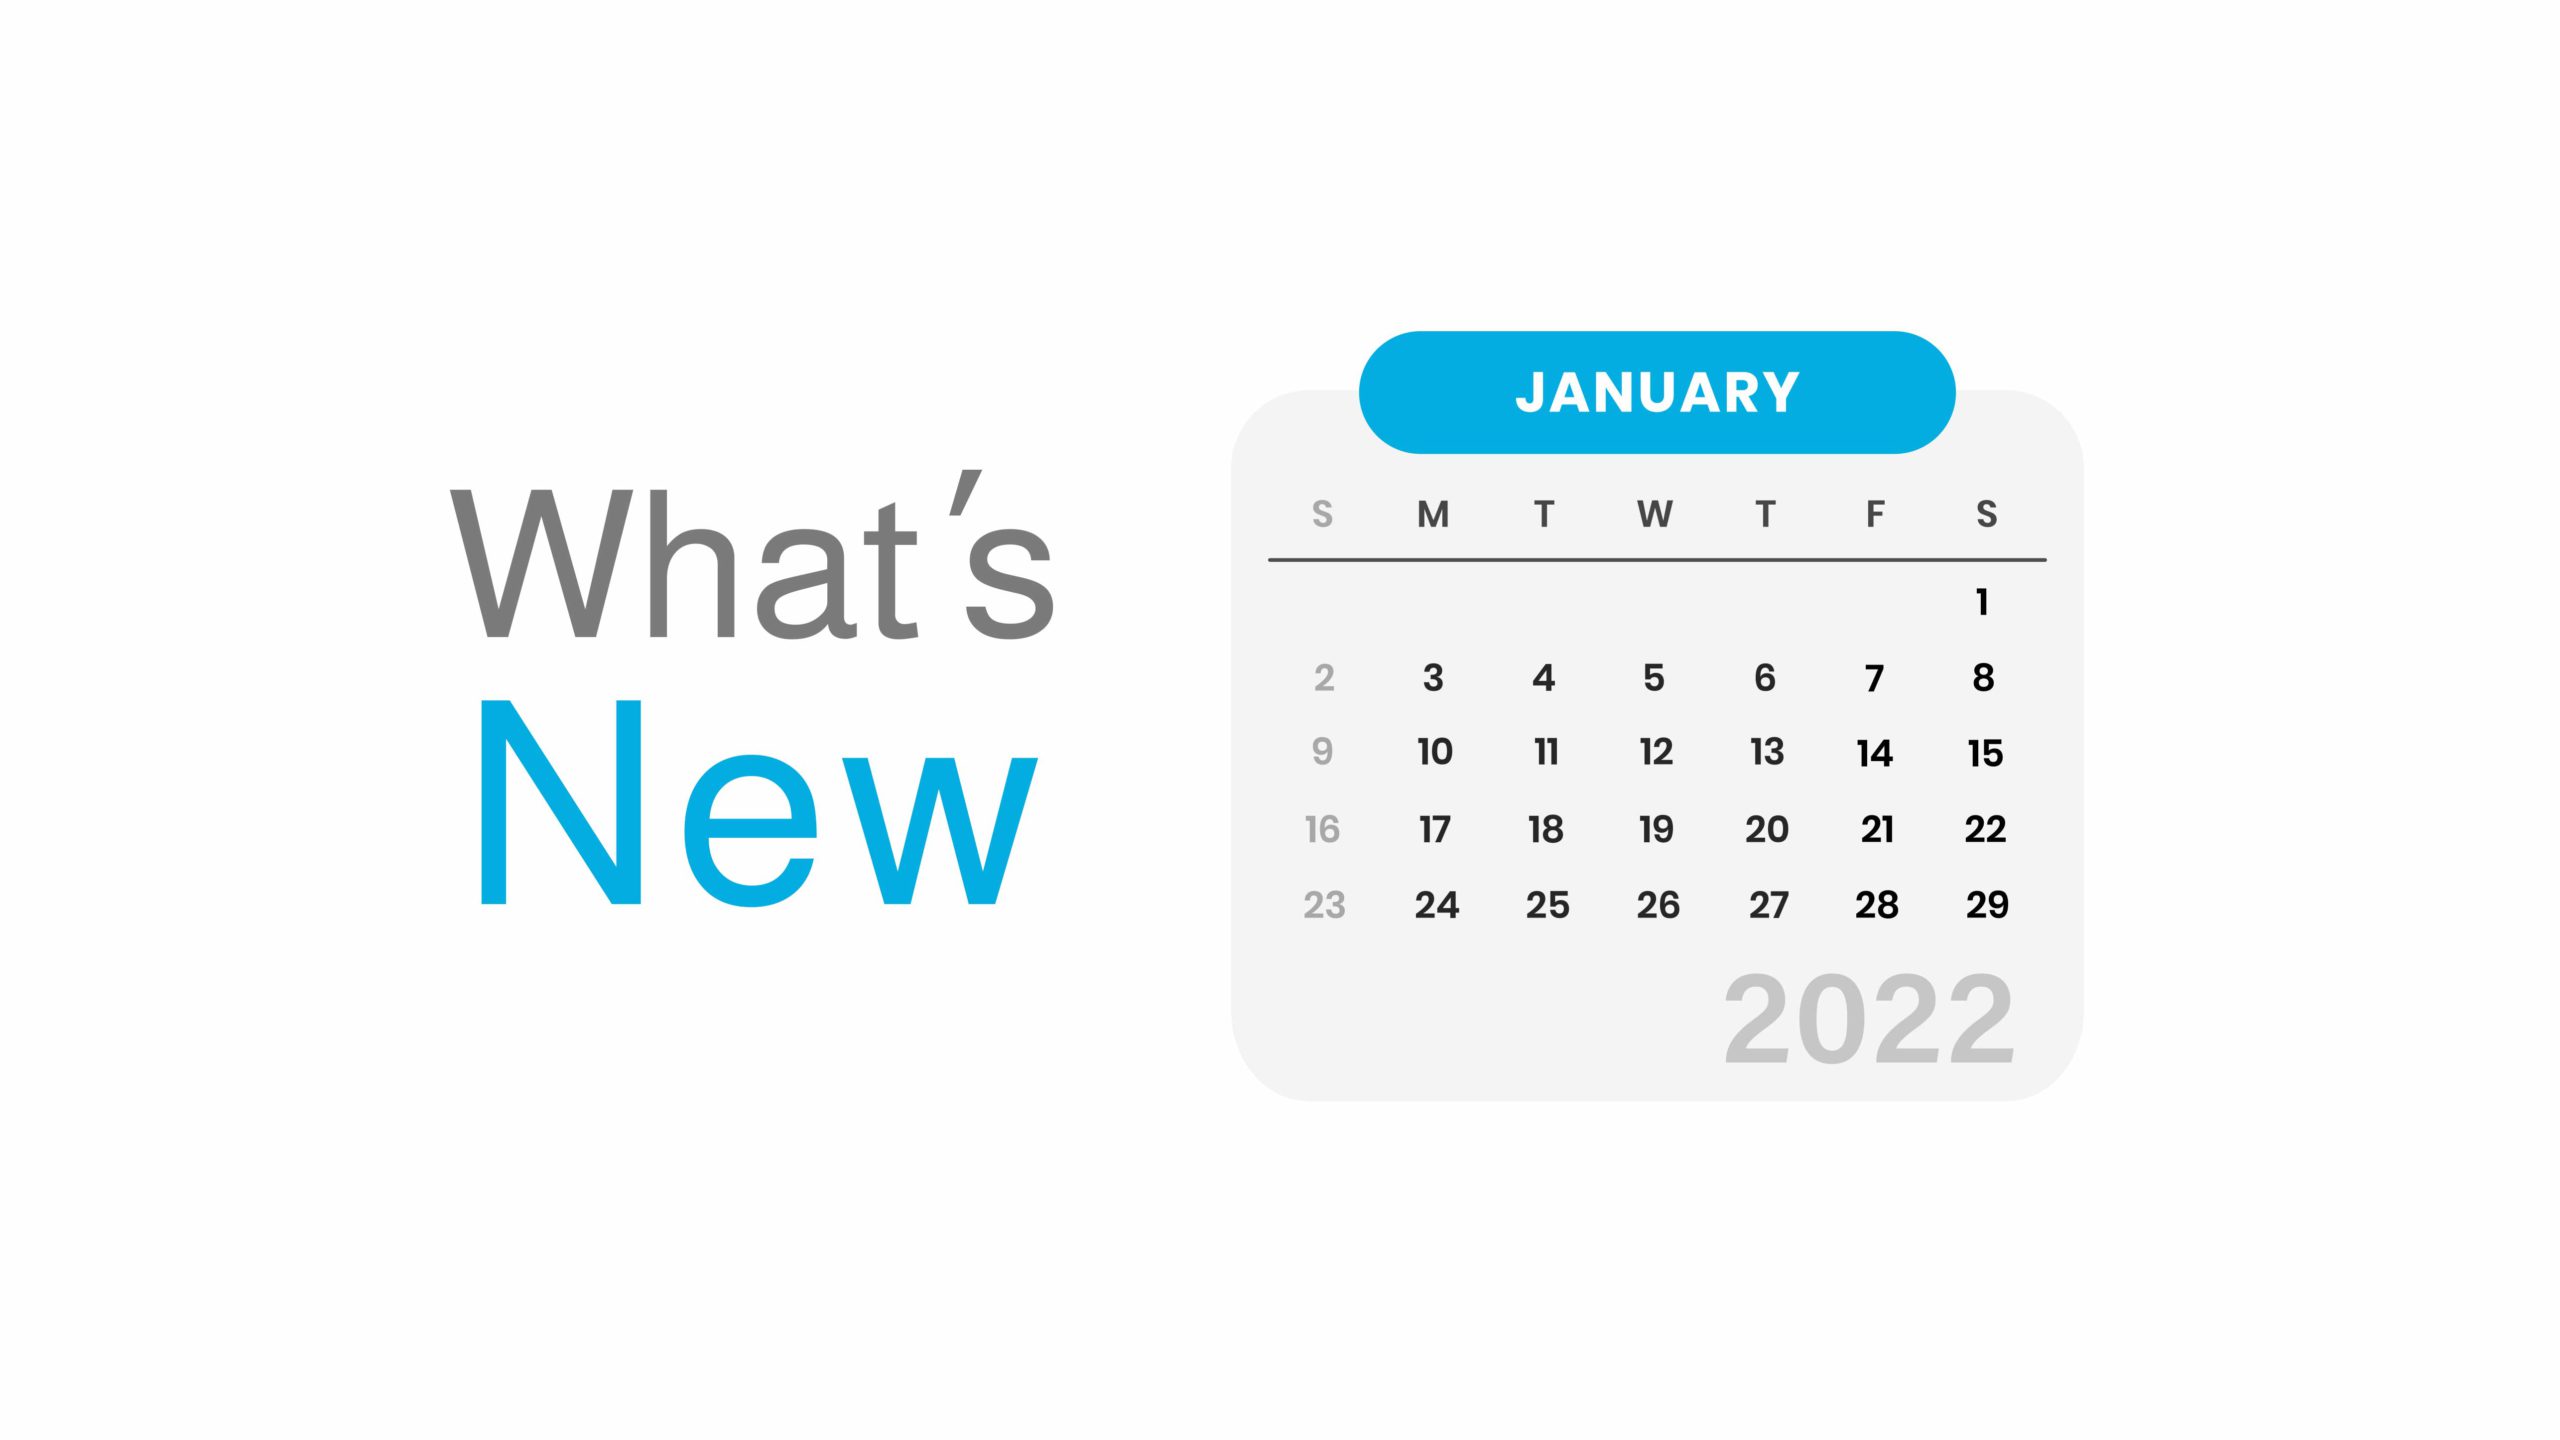 January 2022 Updates: More than 10 Features Enhance Your Work